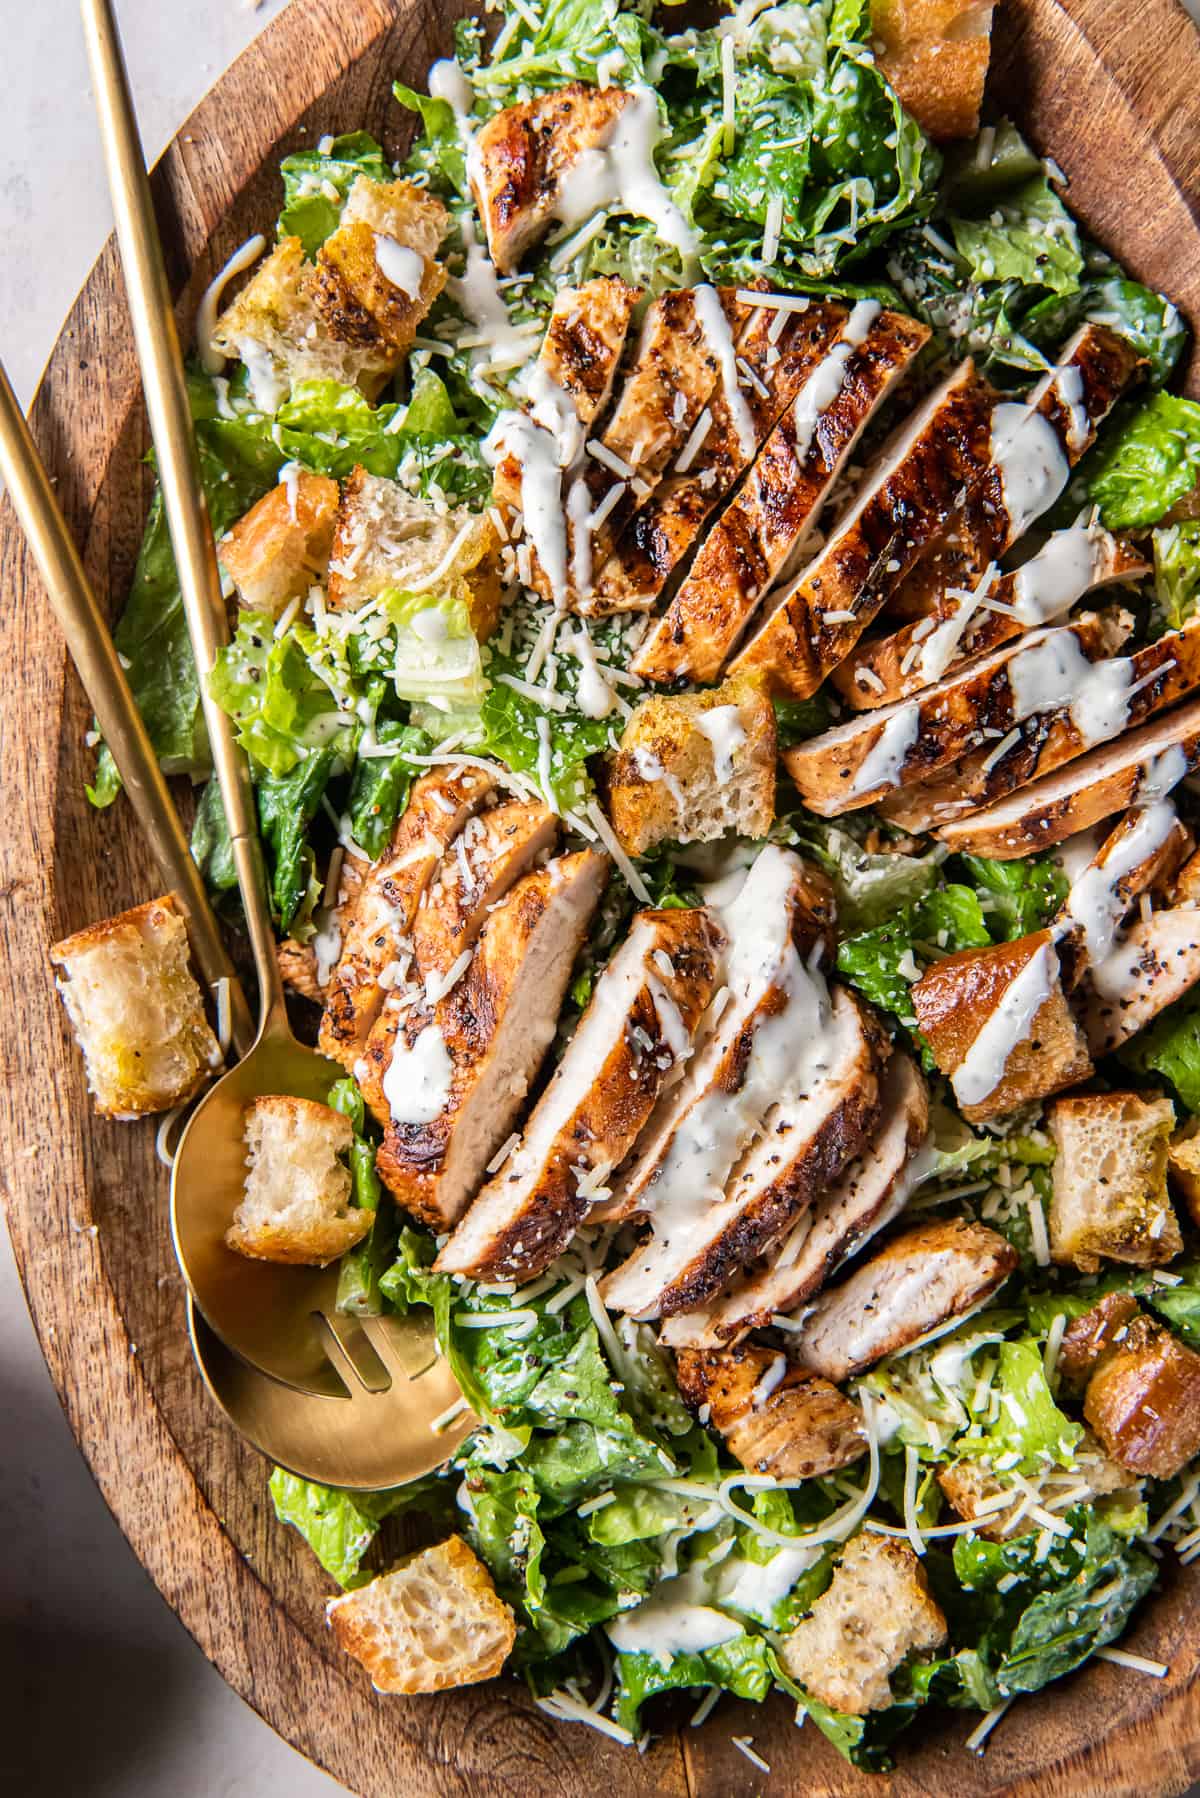 A top down close up shot of two salad spoons resting in a wood bowl filled with grilled chicken Caesar salad.